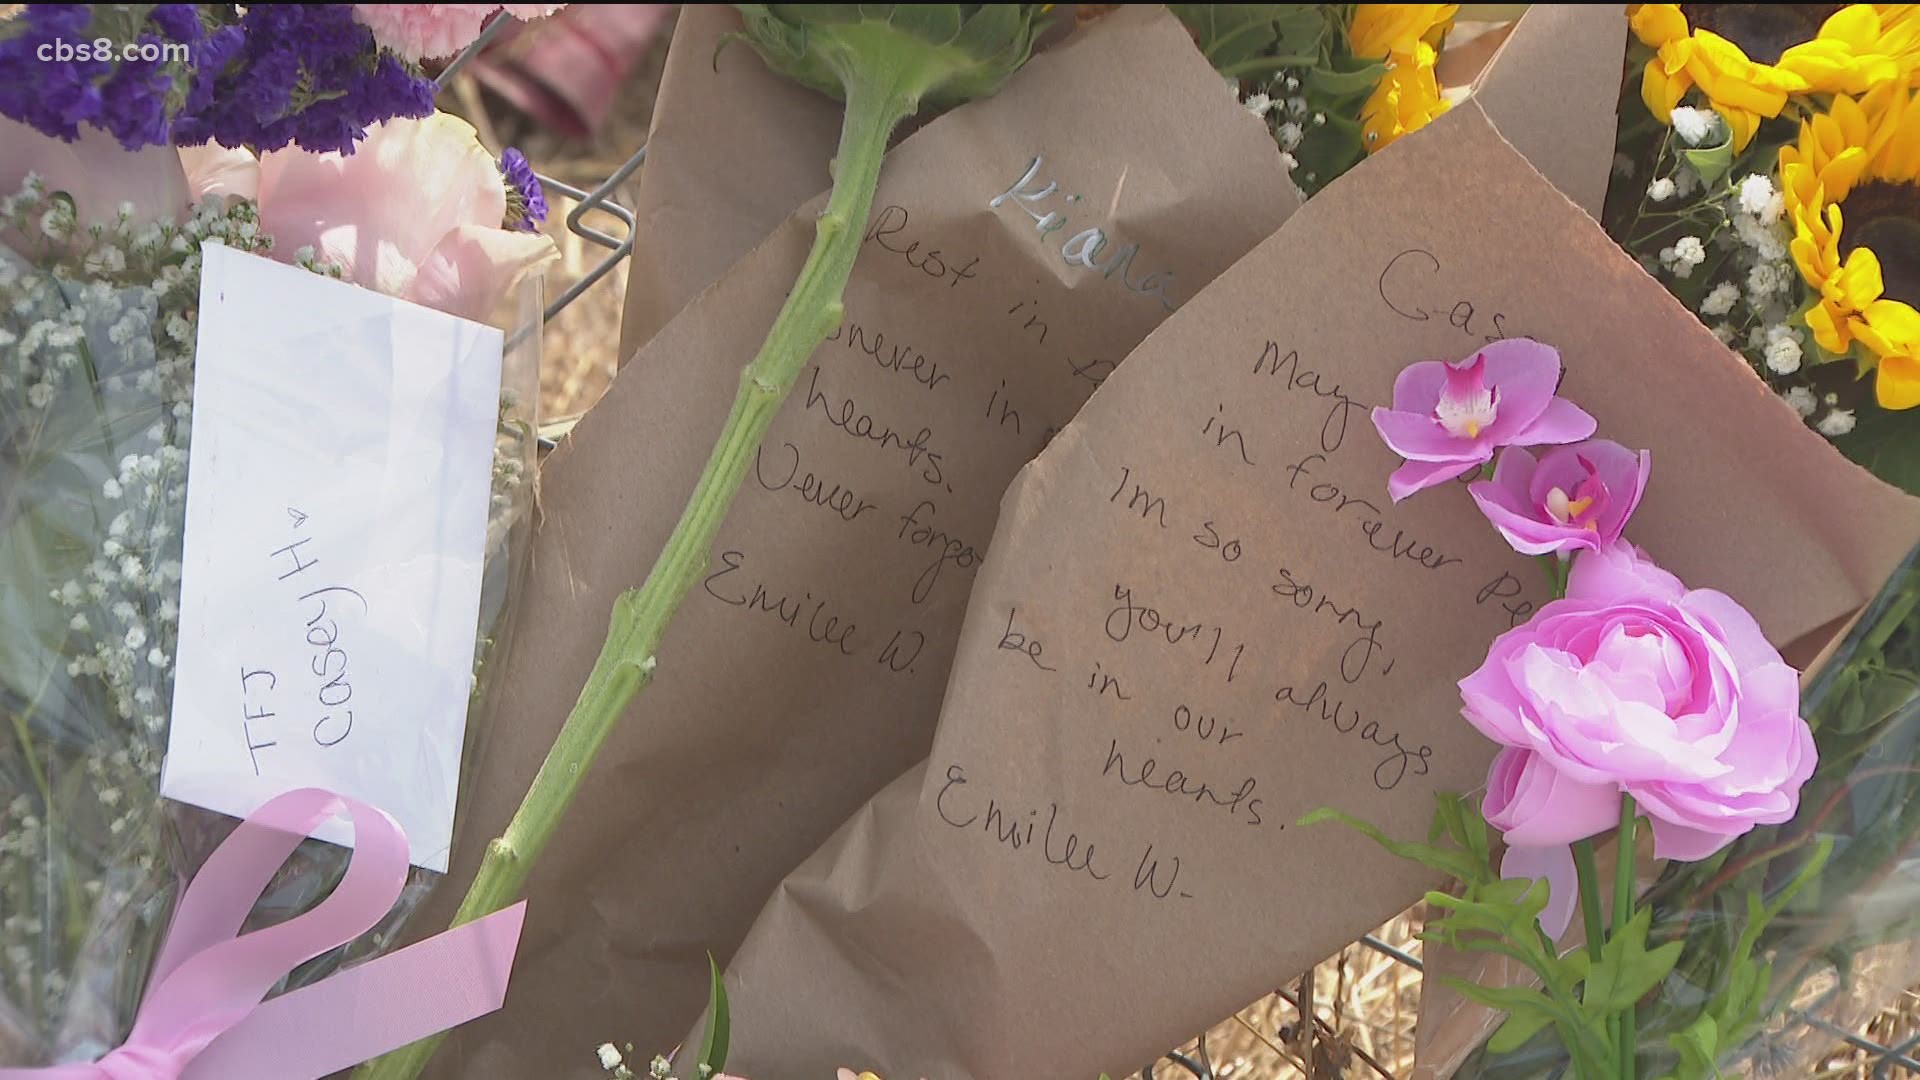 Memorial grows for two young women killed in a fiery car crash